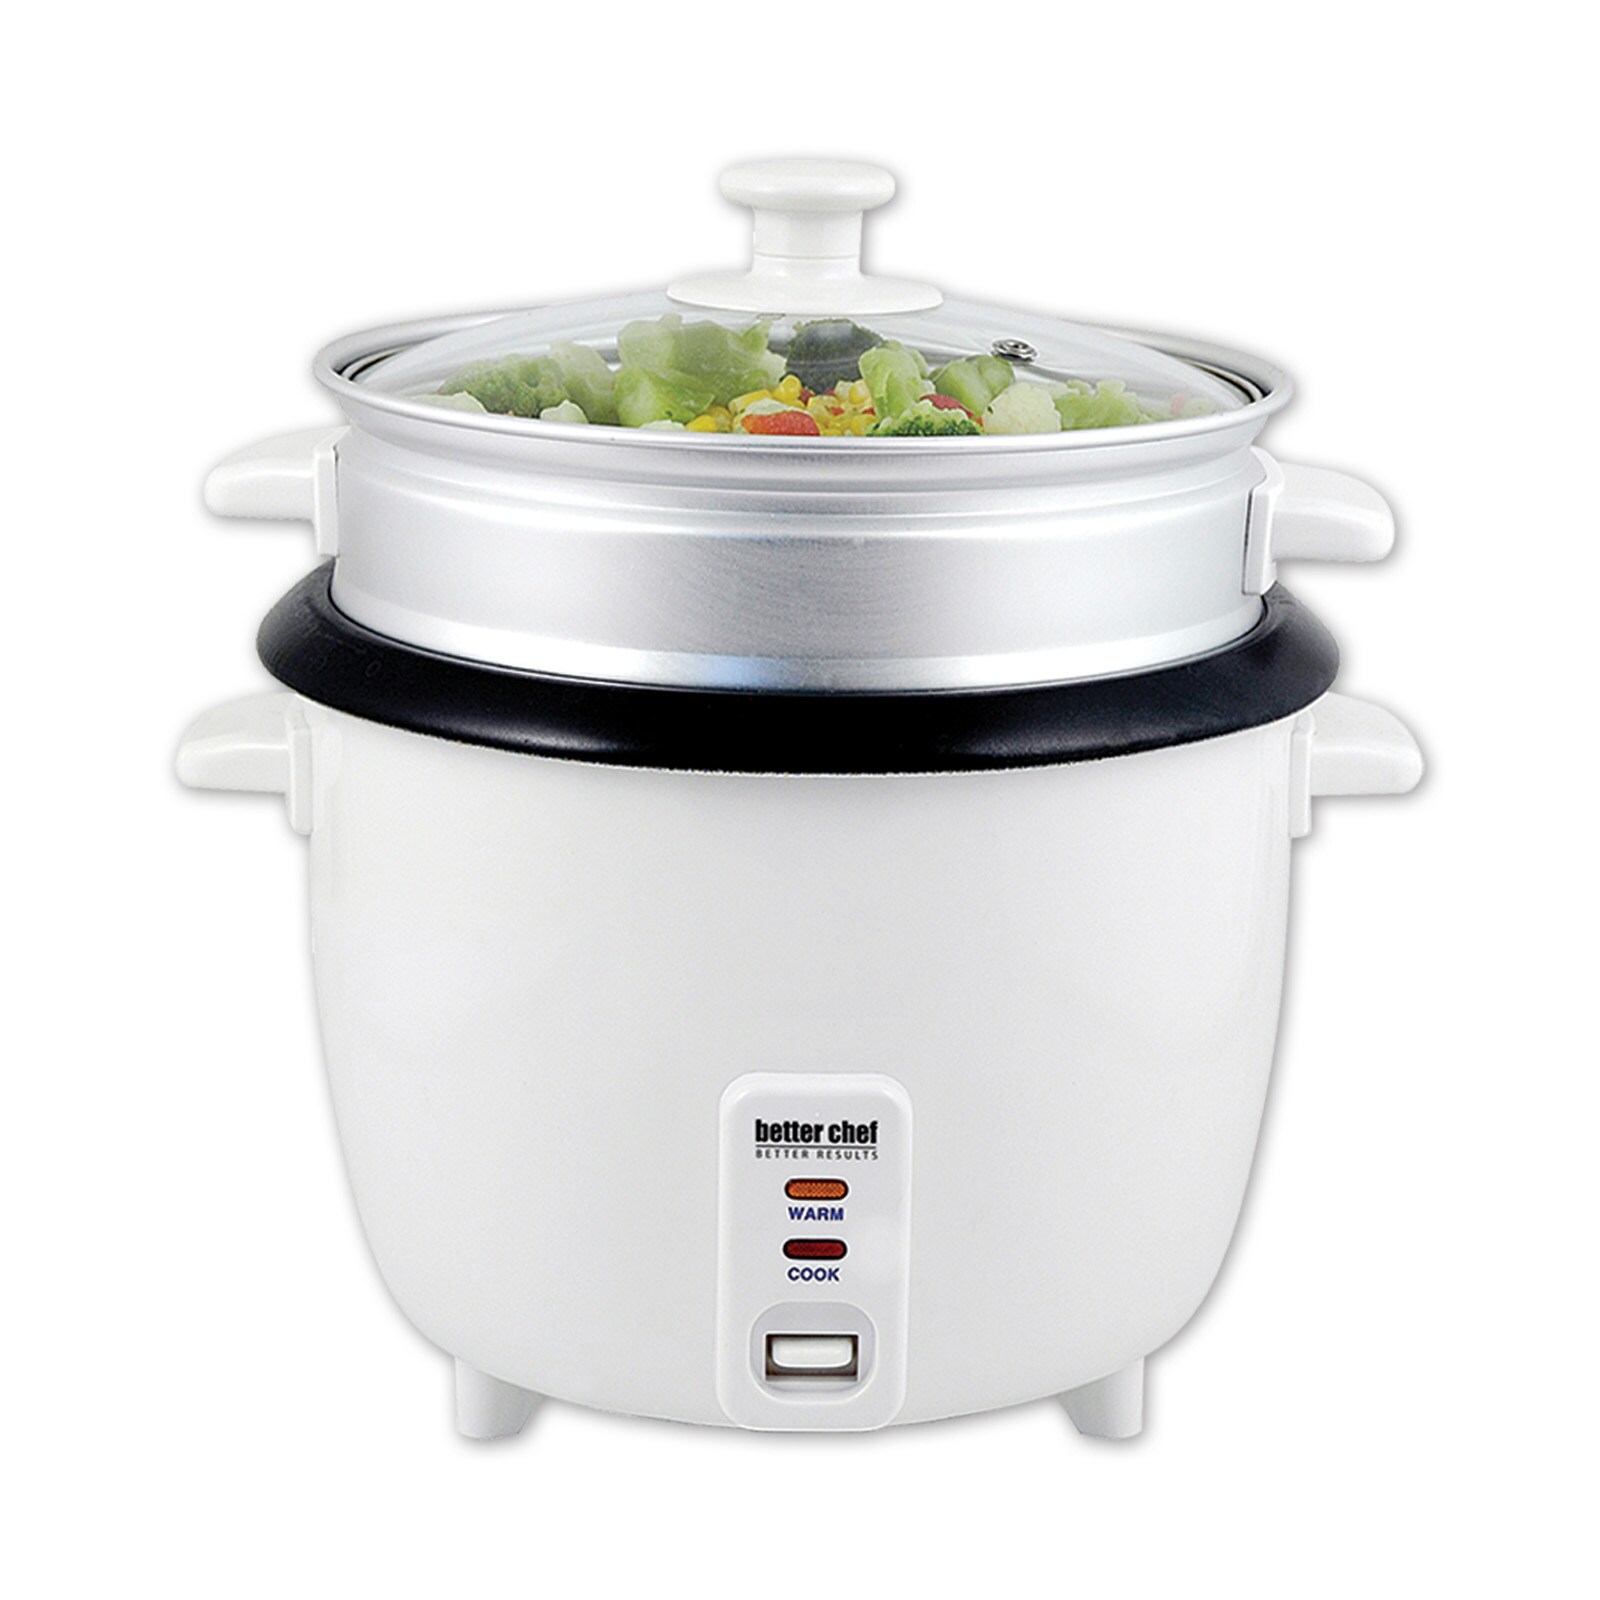 IMUSA UL-Listed 6-Cup Rice Cooker, White Metal Housing, Keep Warm Setting, Removable Non-Stick Bowl, Tempered Glass Lid